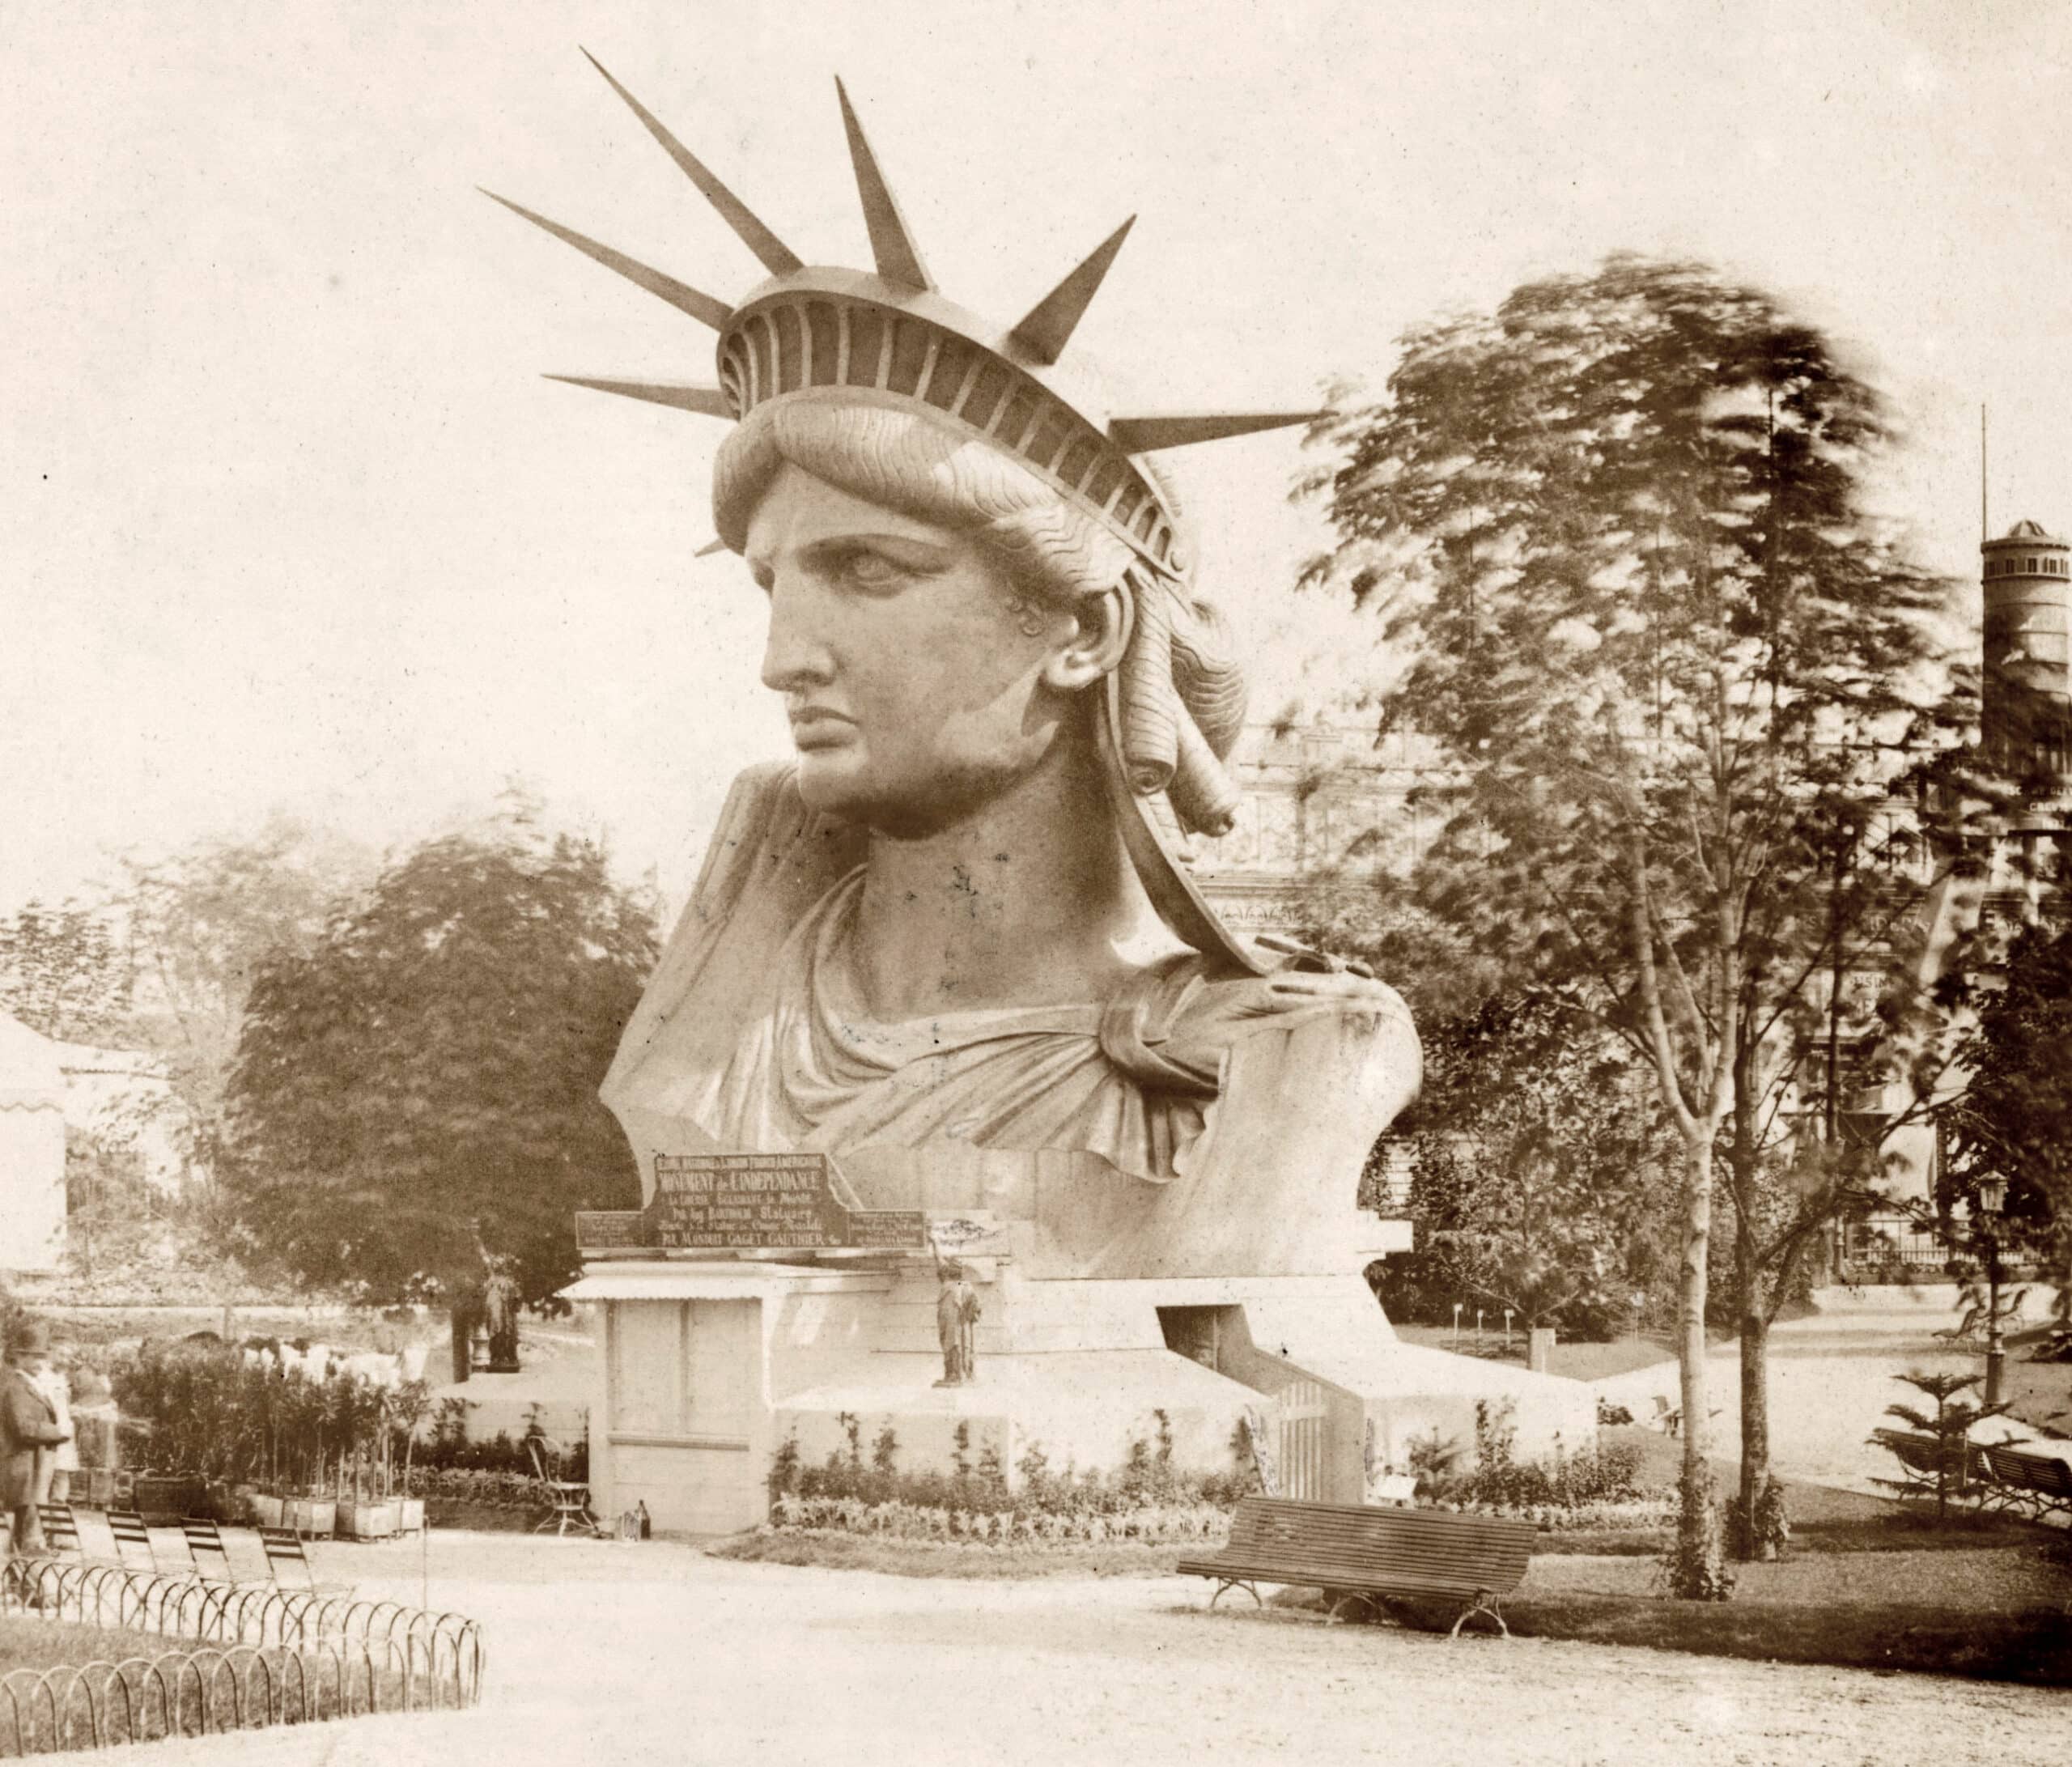 Head of the Statue of Liberty on display in a park in Paris